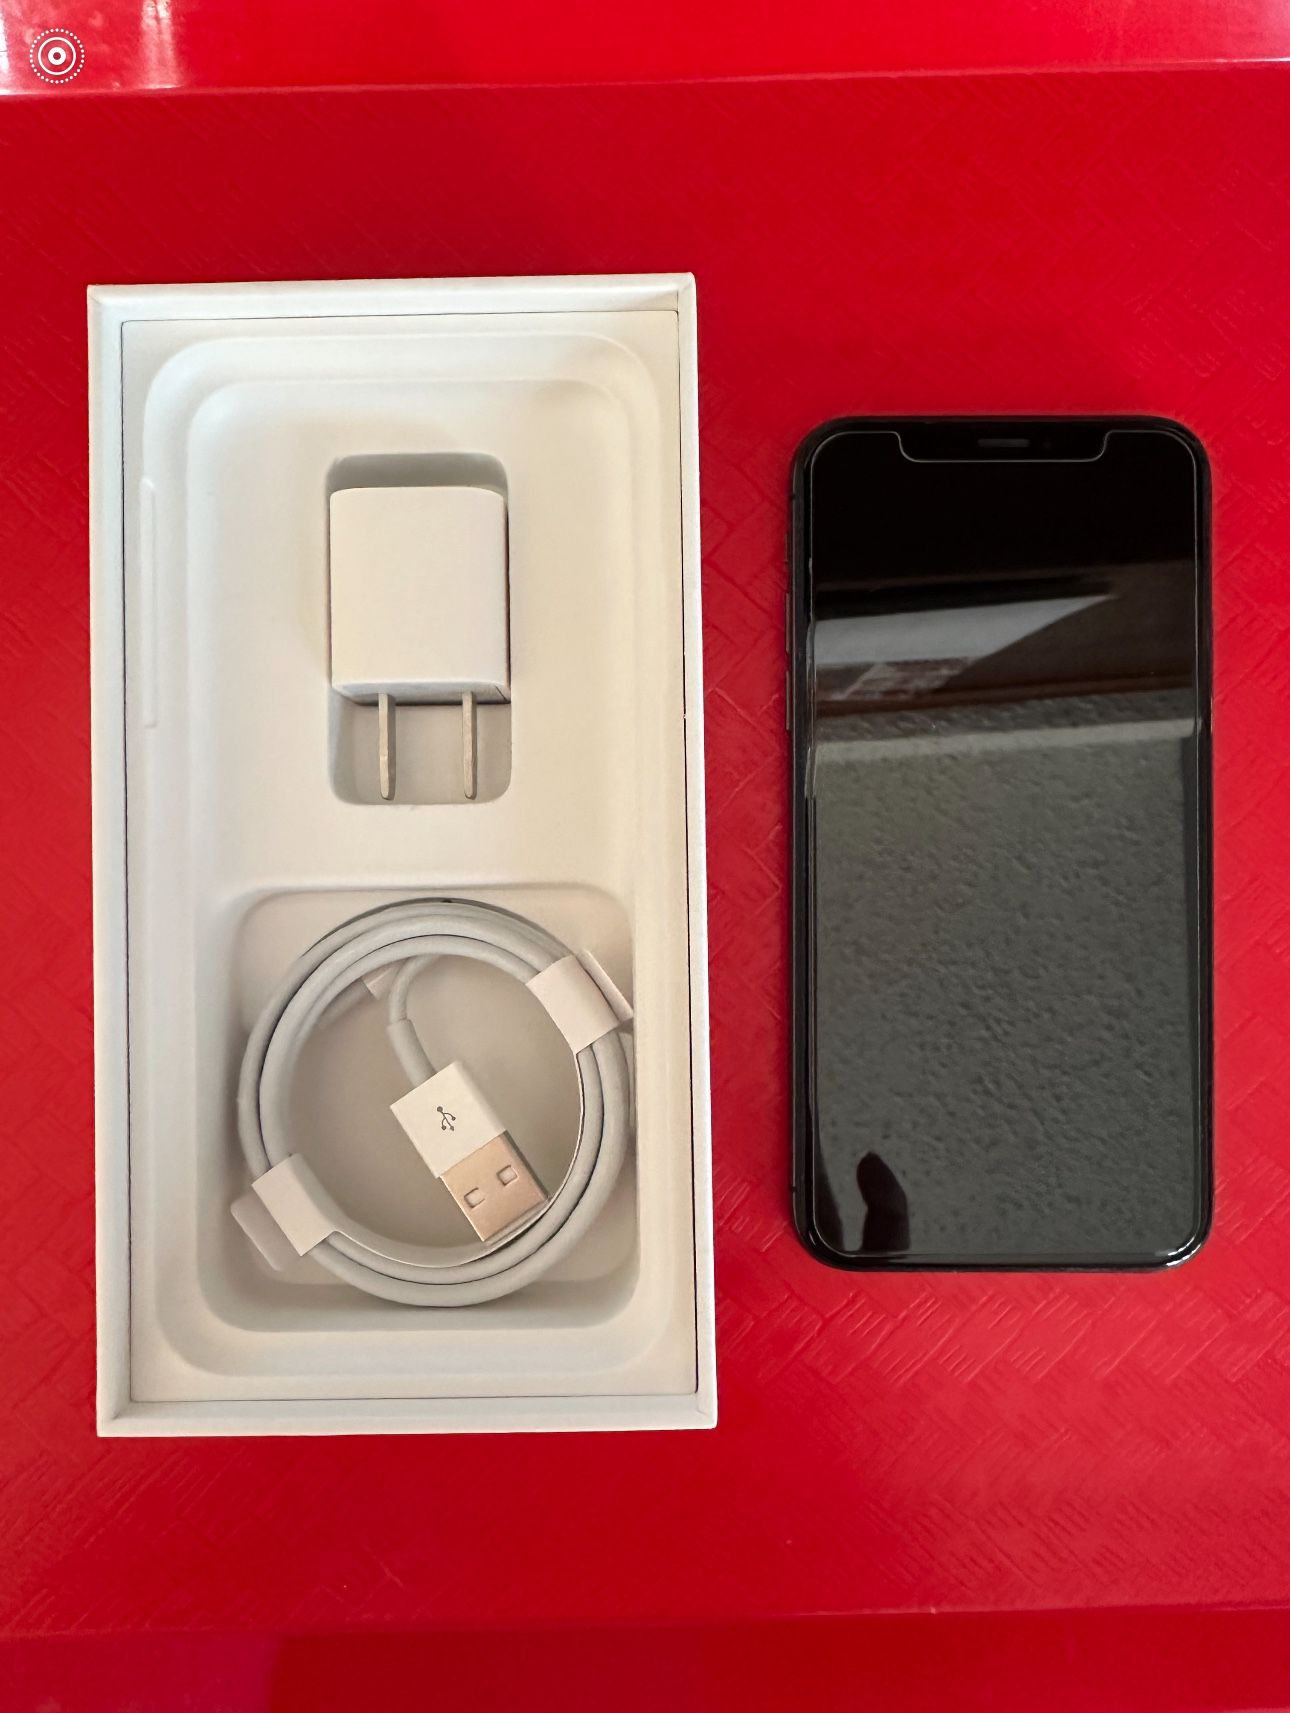 Apple iPhone X / 10 (64 GB) carrier unlocked in excellent working condition. No scratches on screen.